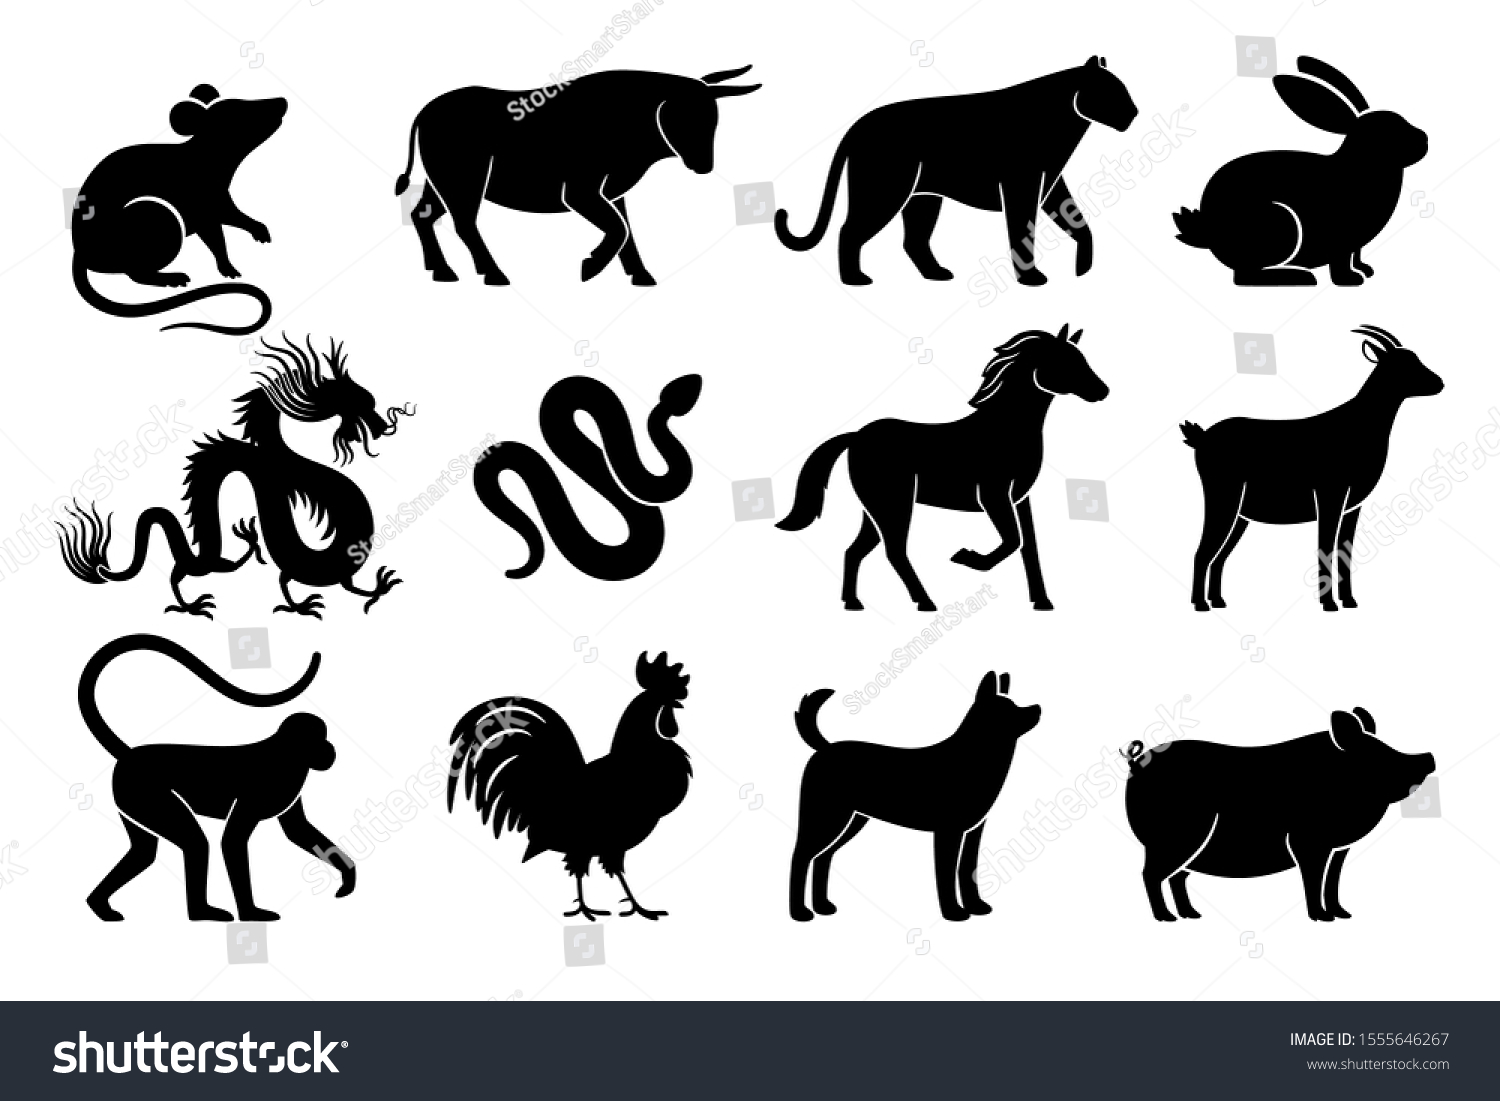 SVG of Chinese horoscope silhouettes. Chinese zodiac animals symbols of year, black signs on white background, tiger and rabbit, bull and dragon mythology drawings svg